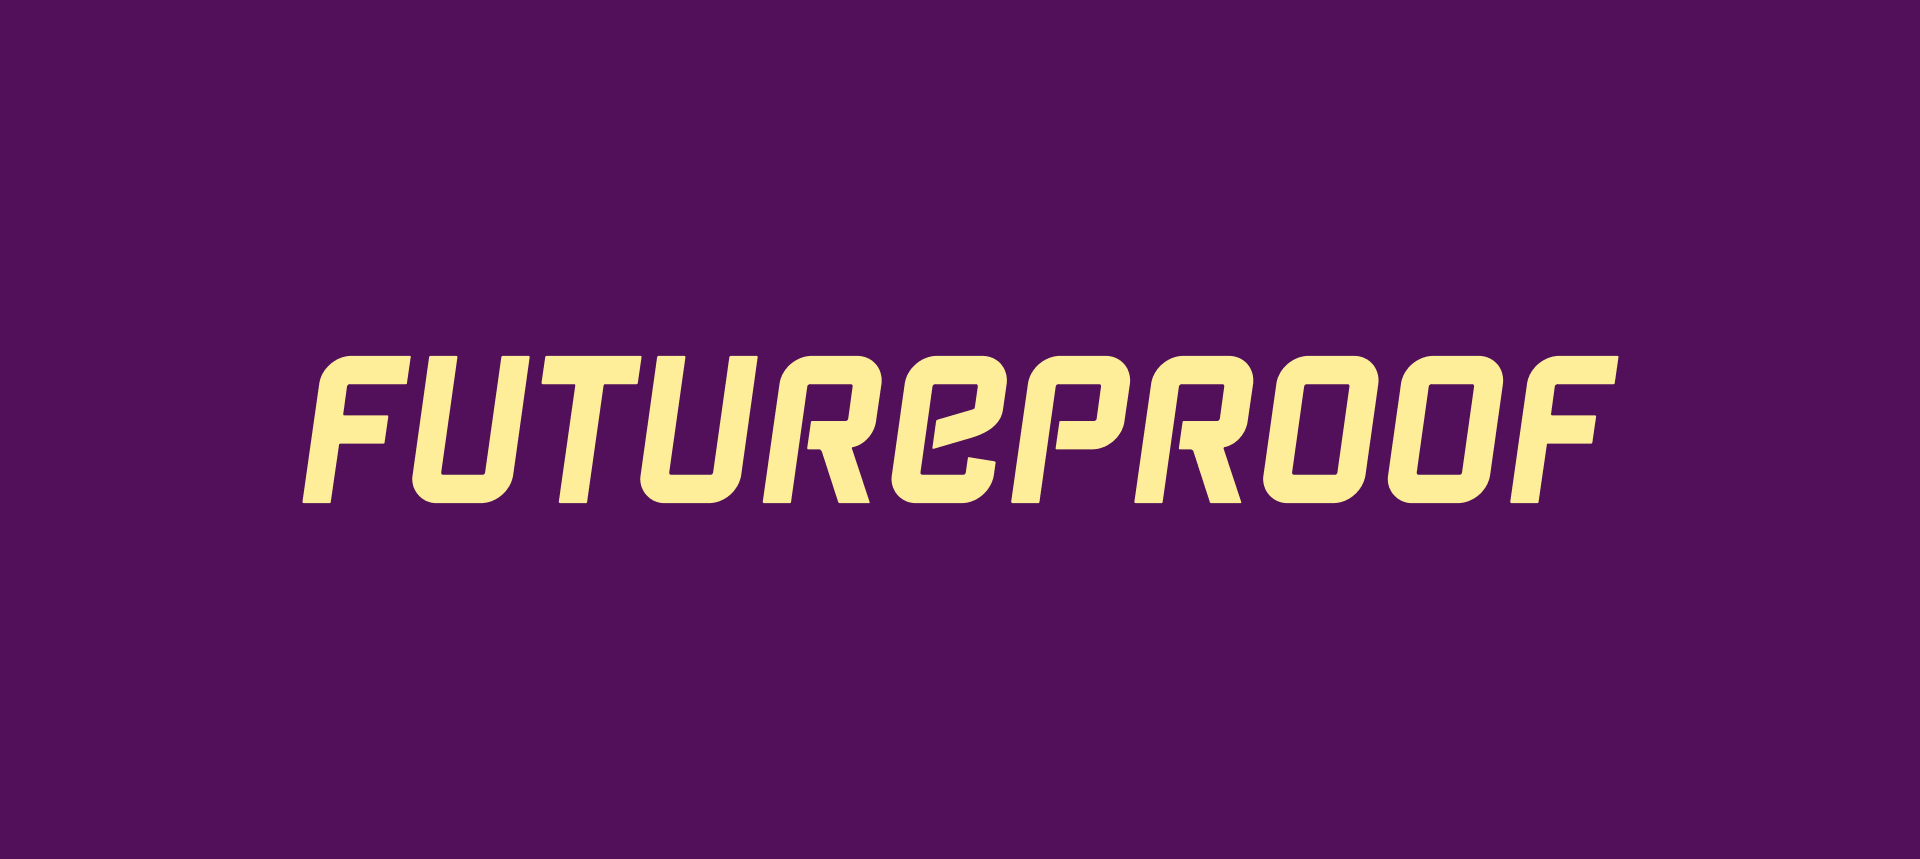 One of this year’s themes at TNW is ‘futureproof’. Go Wombat can help businesses achieve this.